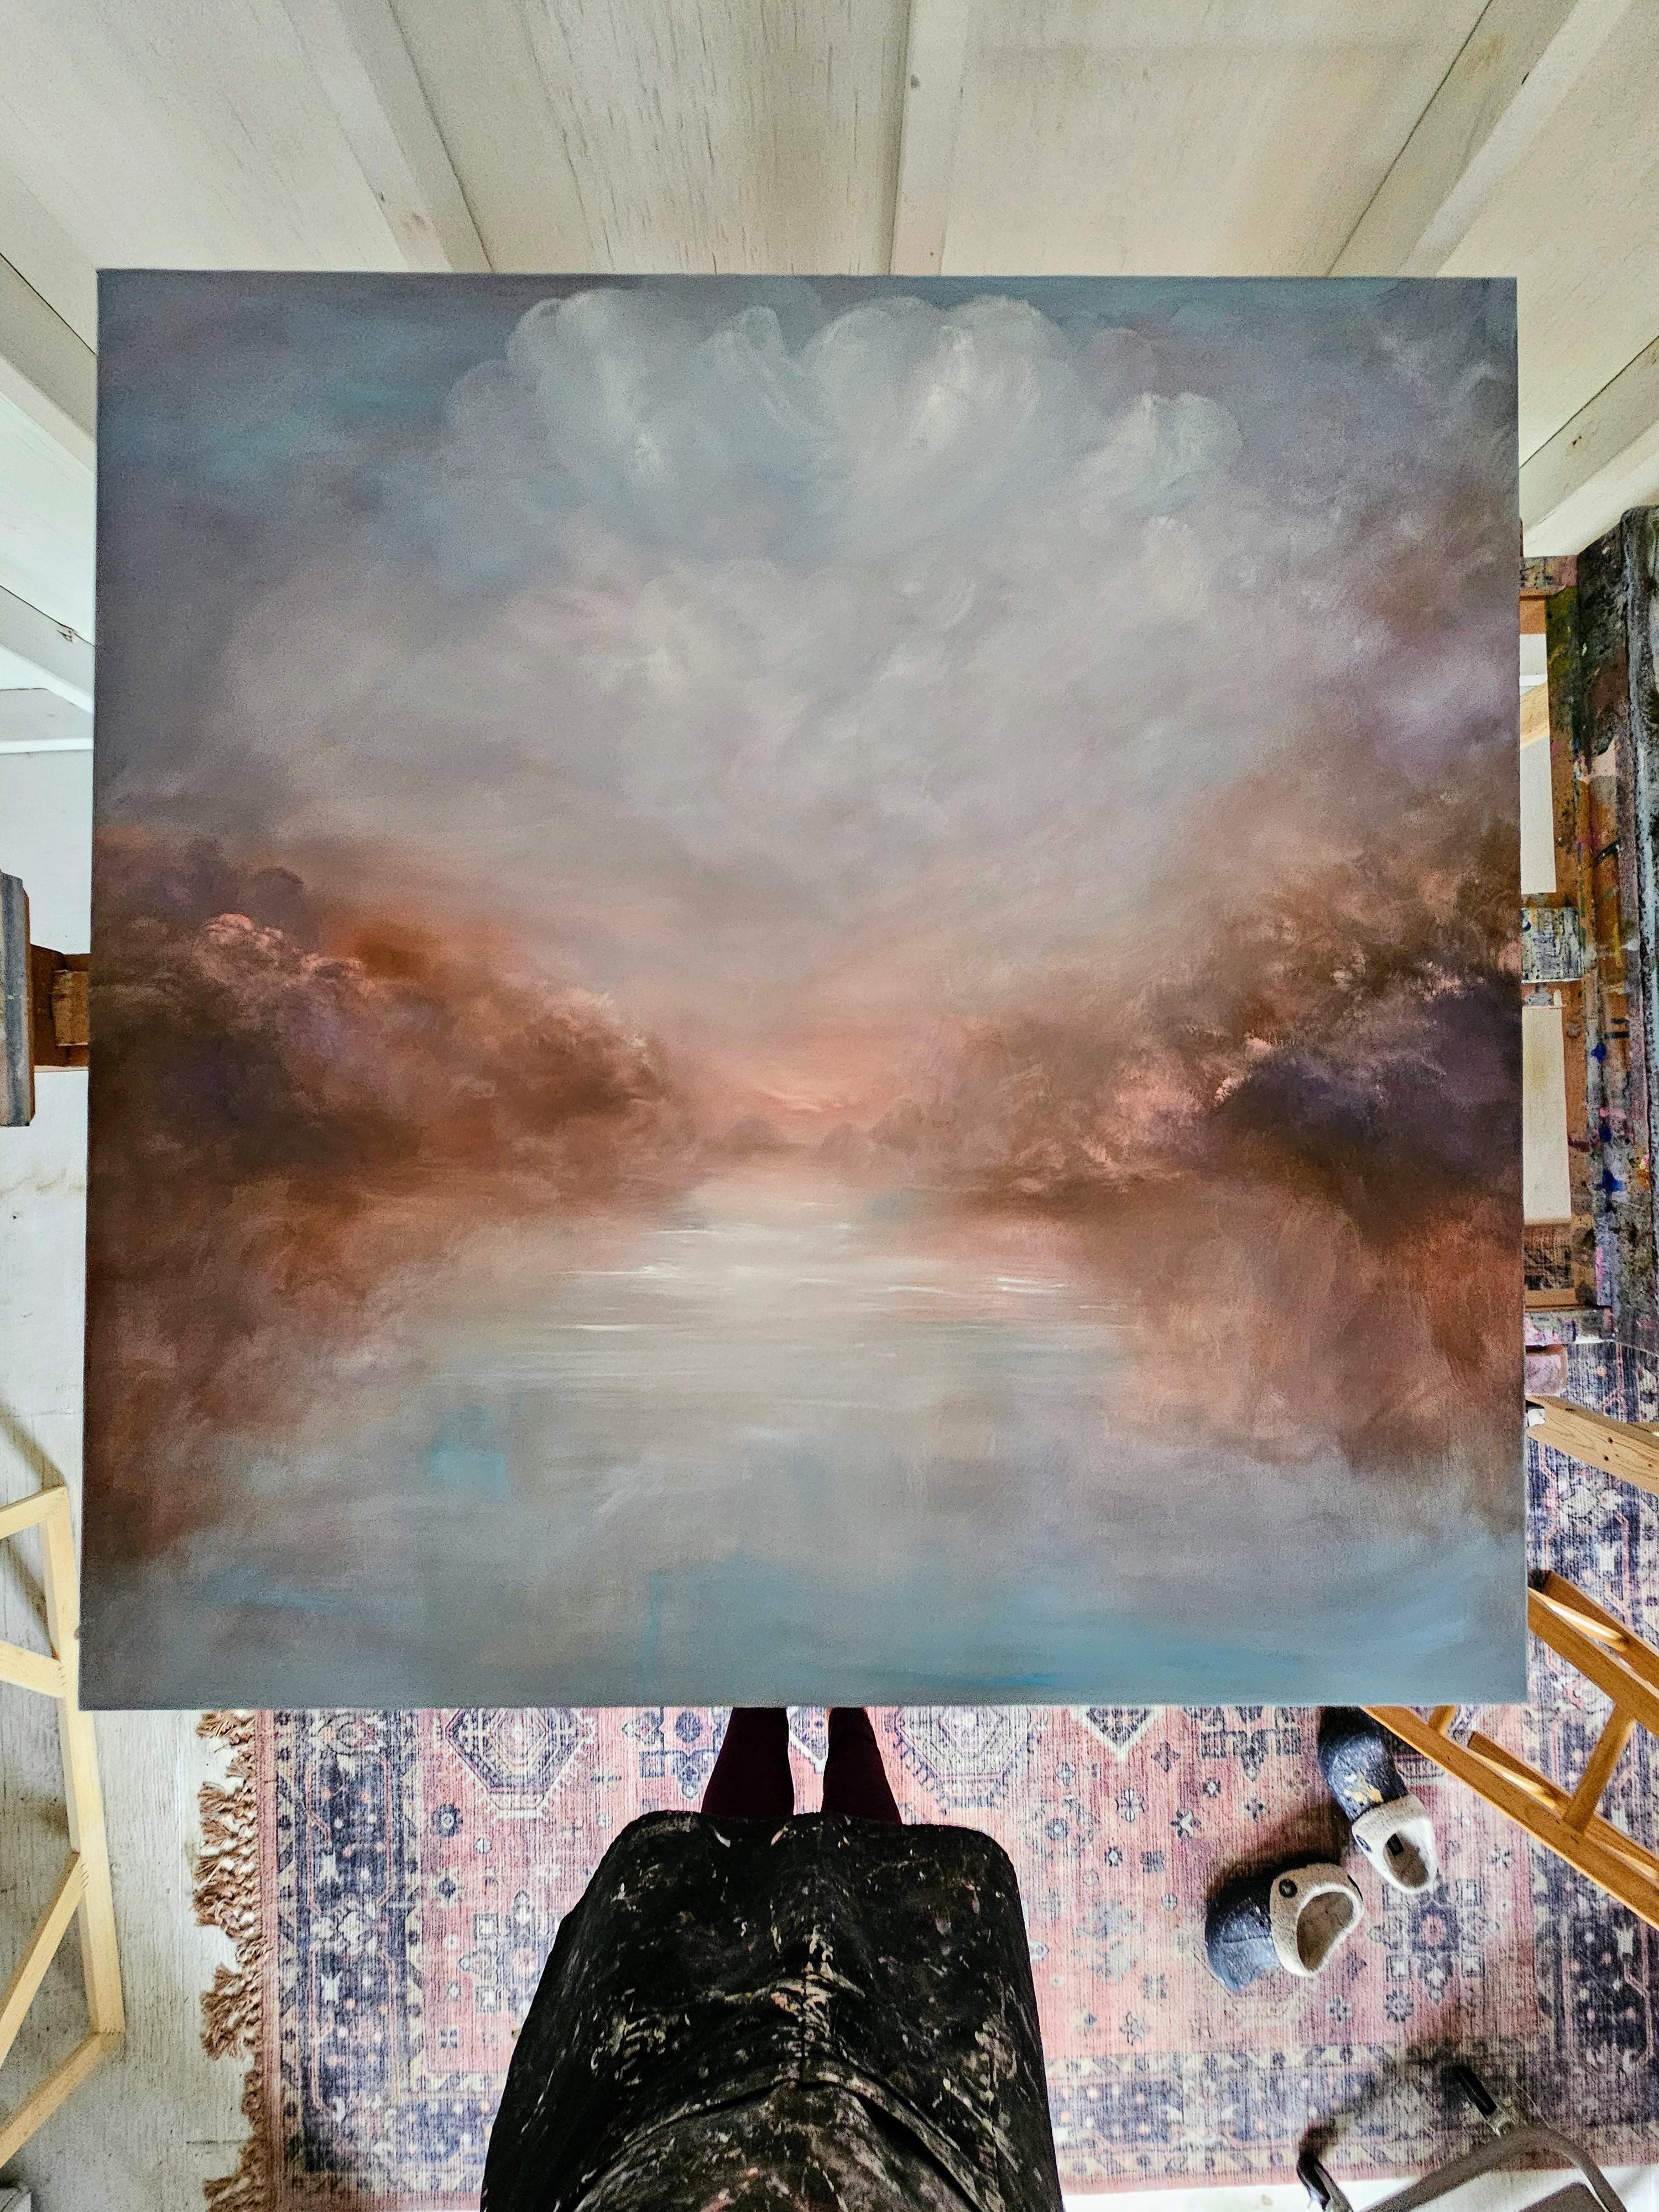 The ecstasy - Warm atmospheric abstract landscape painting - Painting by Jennifer L. Baker